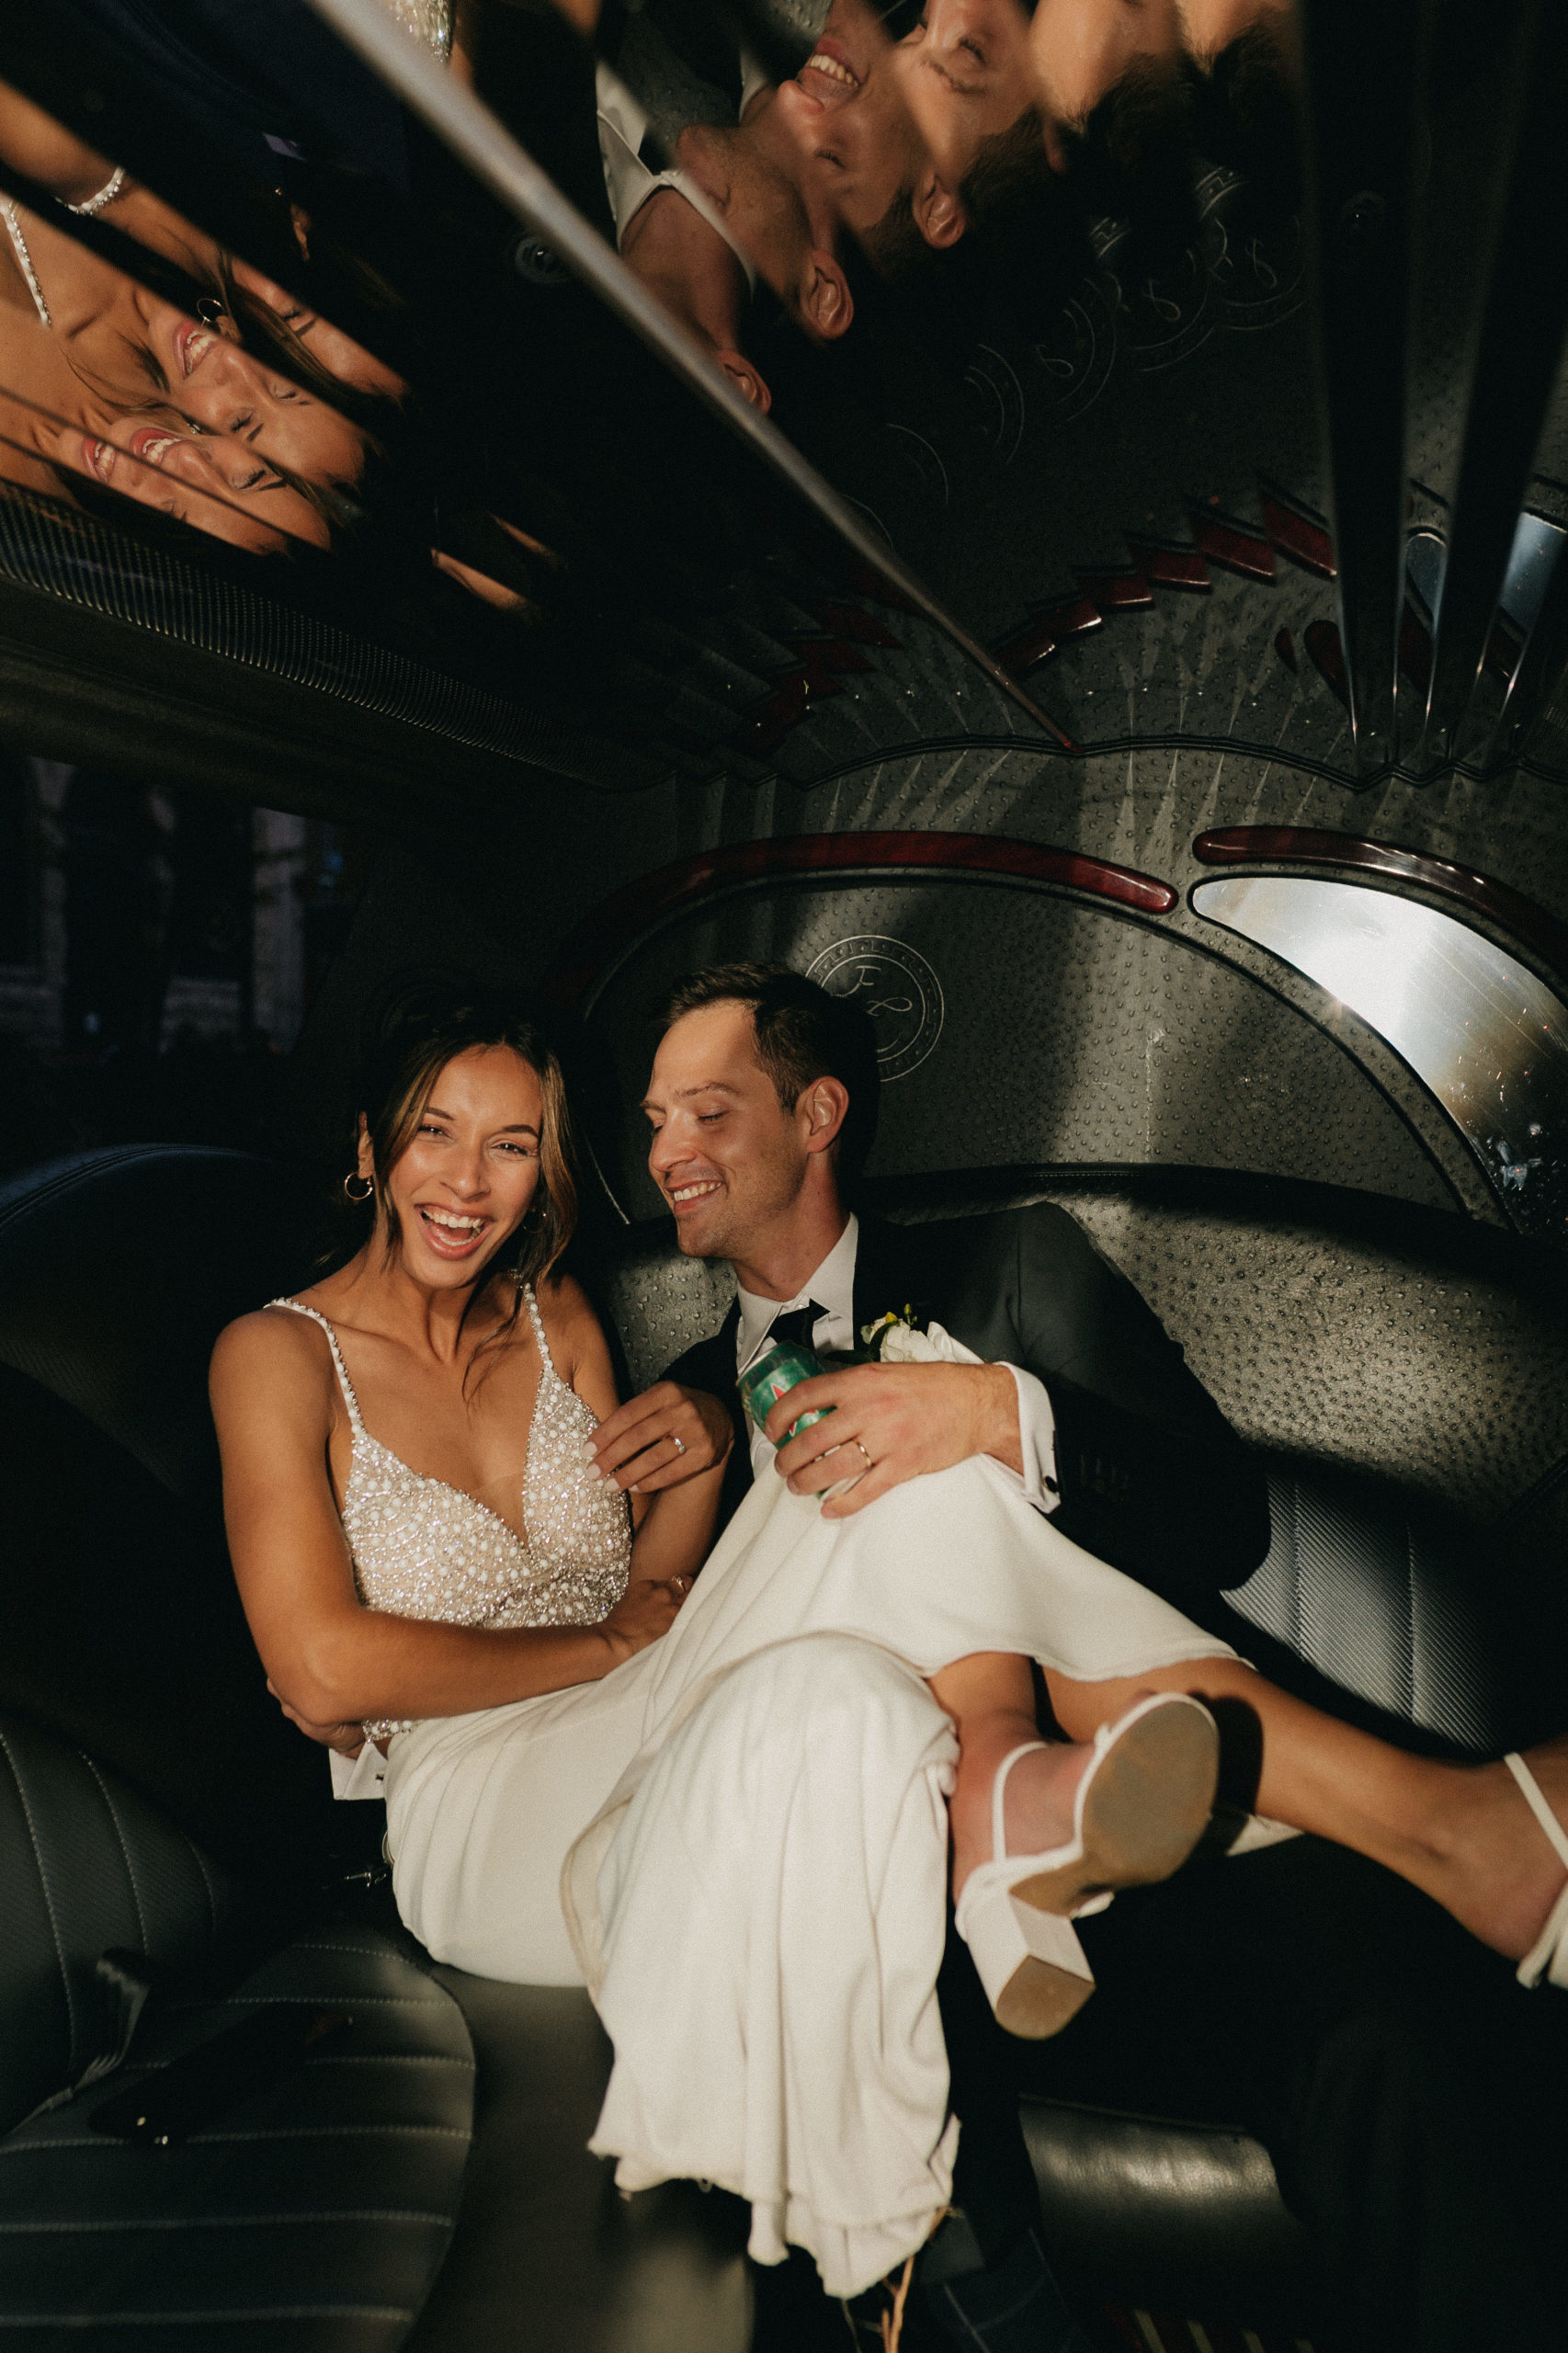 Bride & Groom laughing in a limo